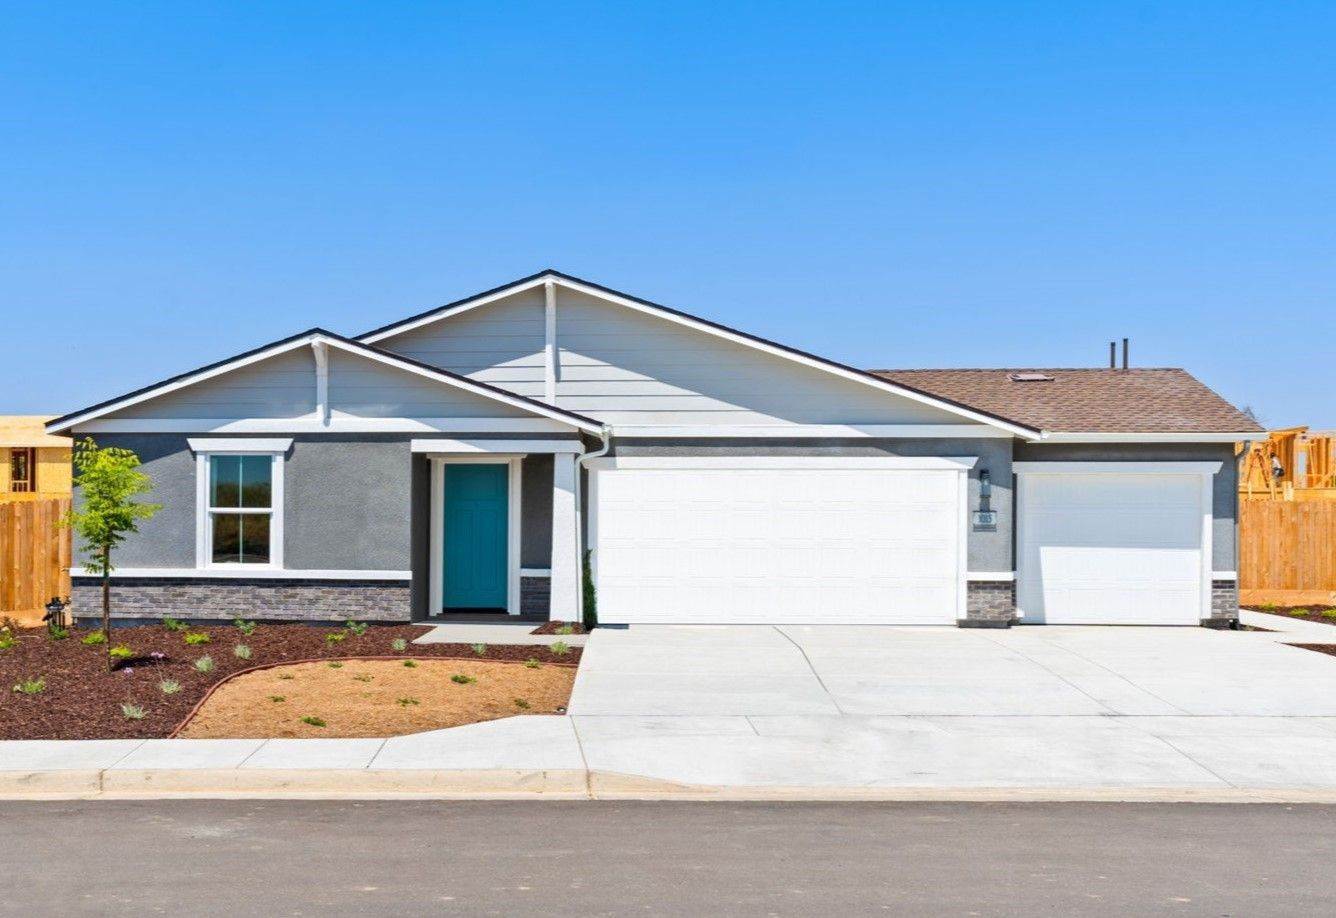 Canterbury Heights xây dựng tại 5817 Beltrami Place, Bakersfield, CA 93313